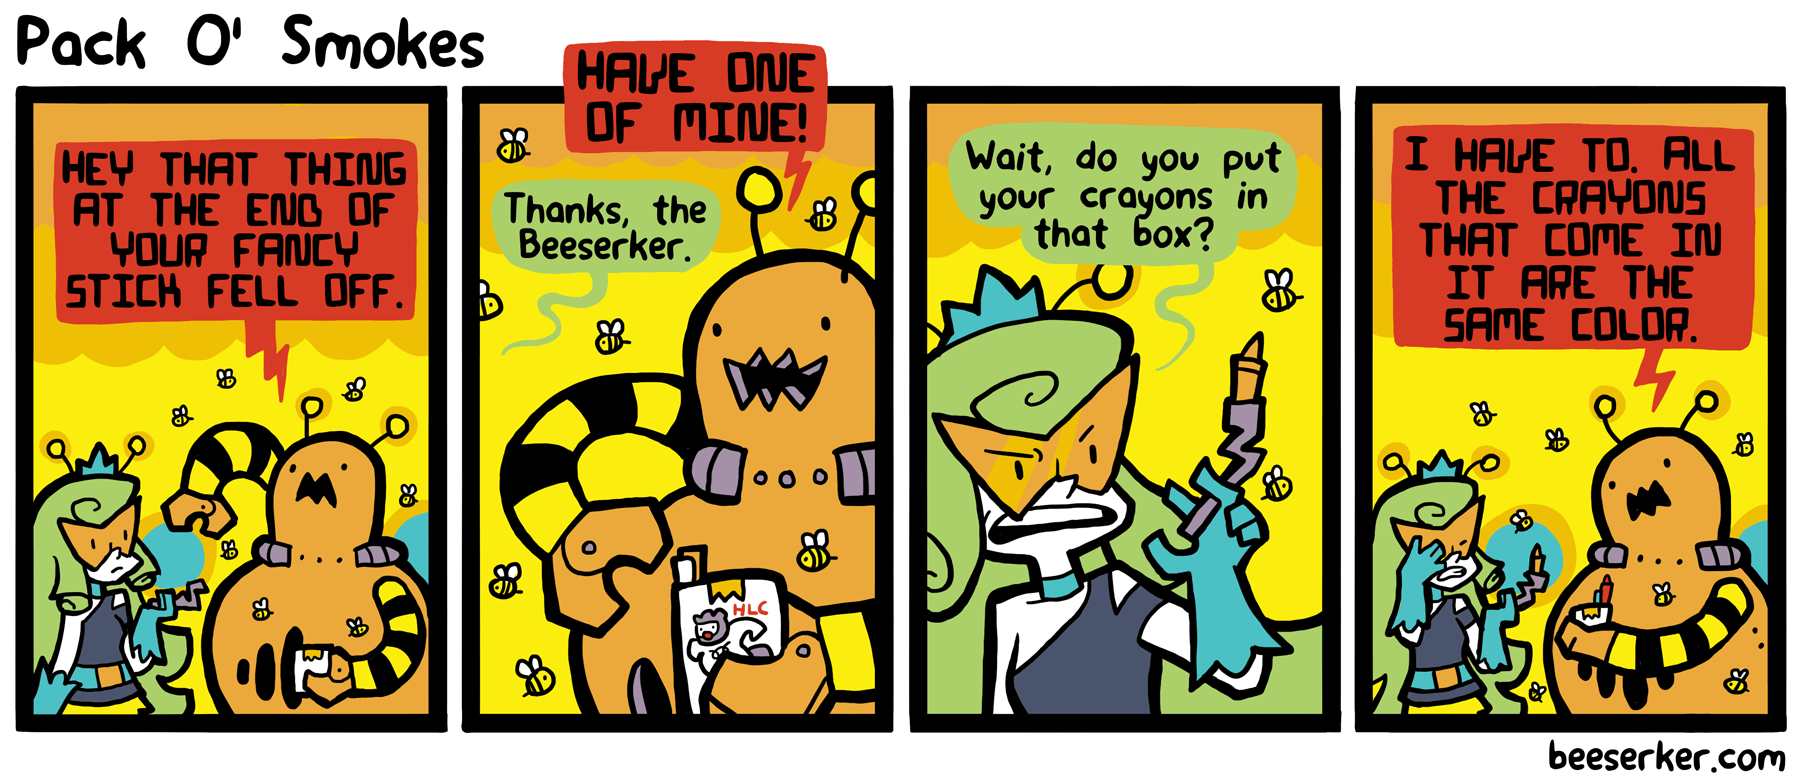 Beeserker is a lot like Batman - they both occasionally have a 'the' before their names, and their parents die all the time.